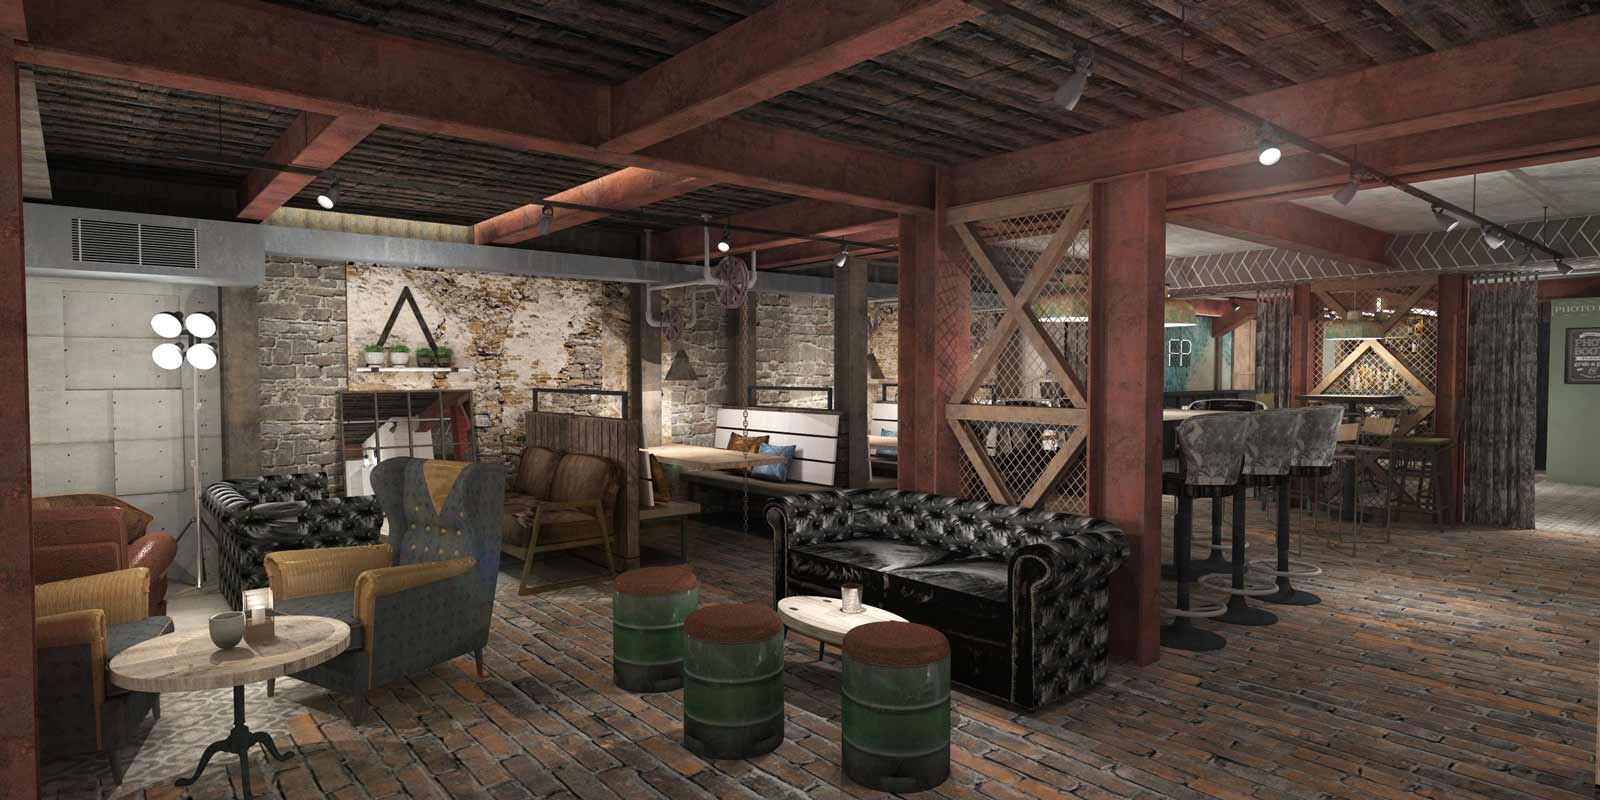 The Foundry Project will be opening an industrial styled bar on the Ginnel in Harrogate